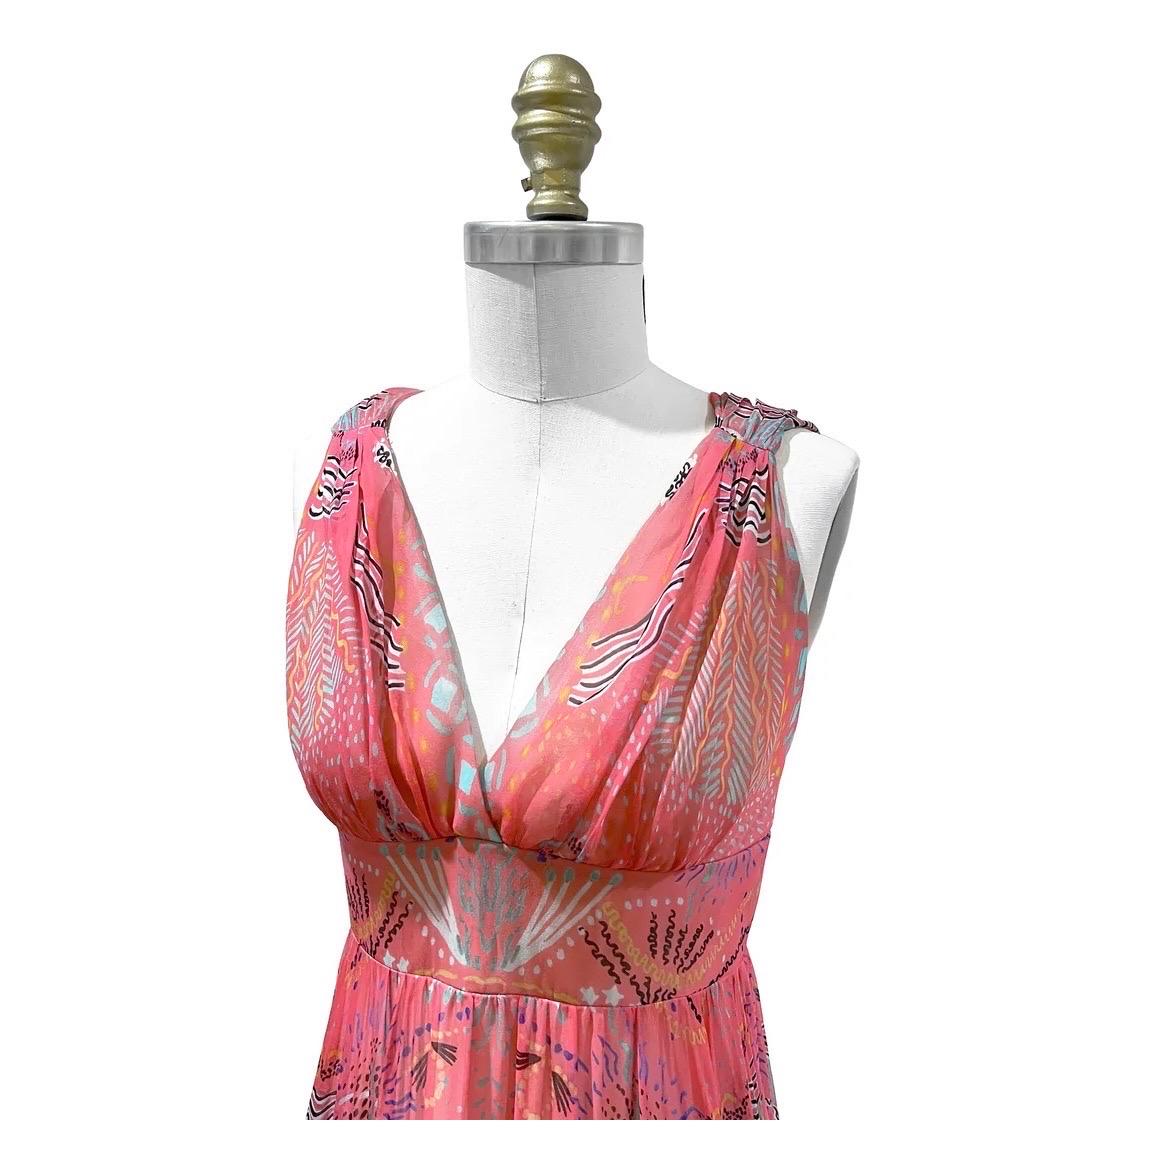 Empire Squiggle Print Dress by Christian Dior  
Made in France 
Pink 
Abstract squiggle print detail throughout dress
Sheer silk fabric
